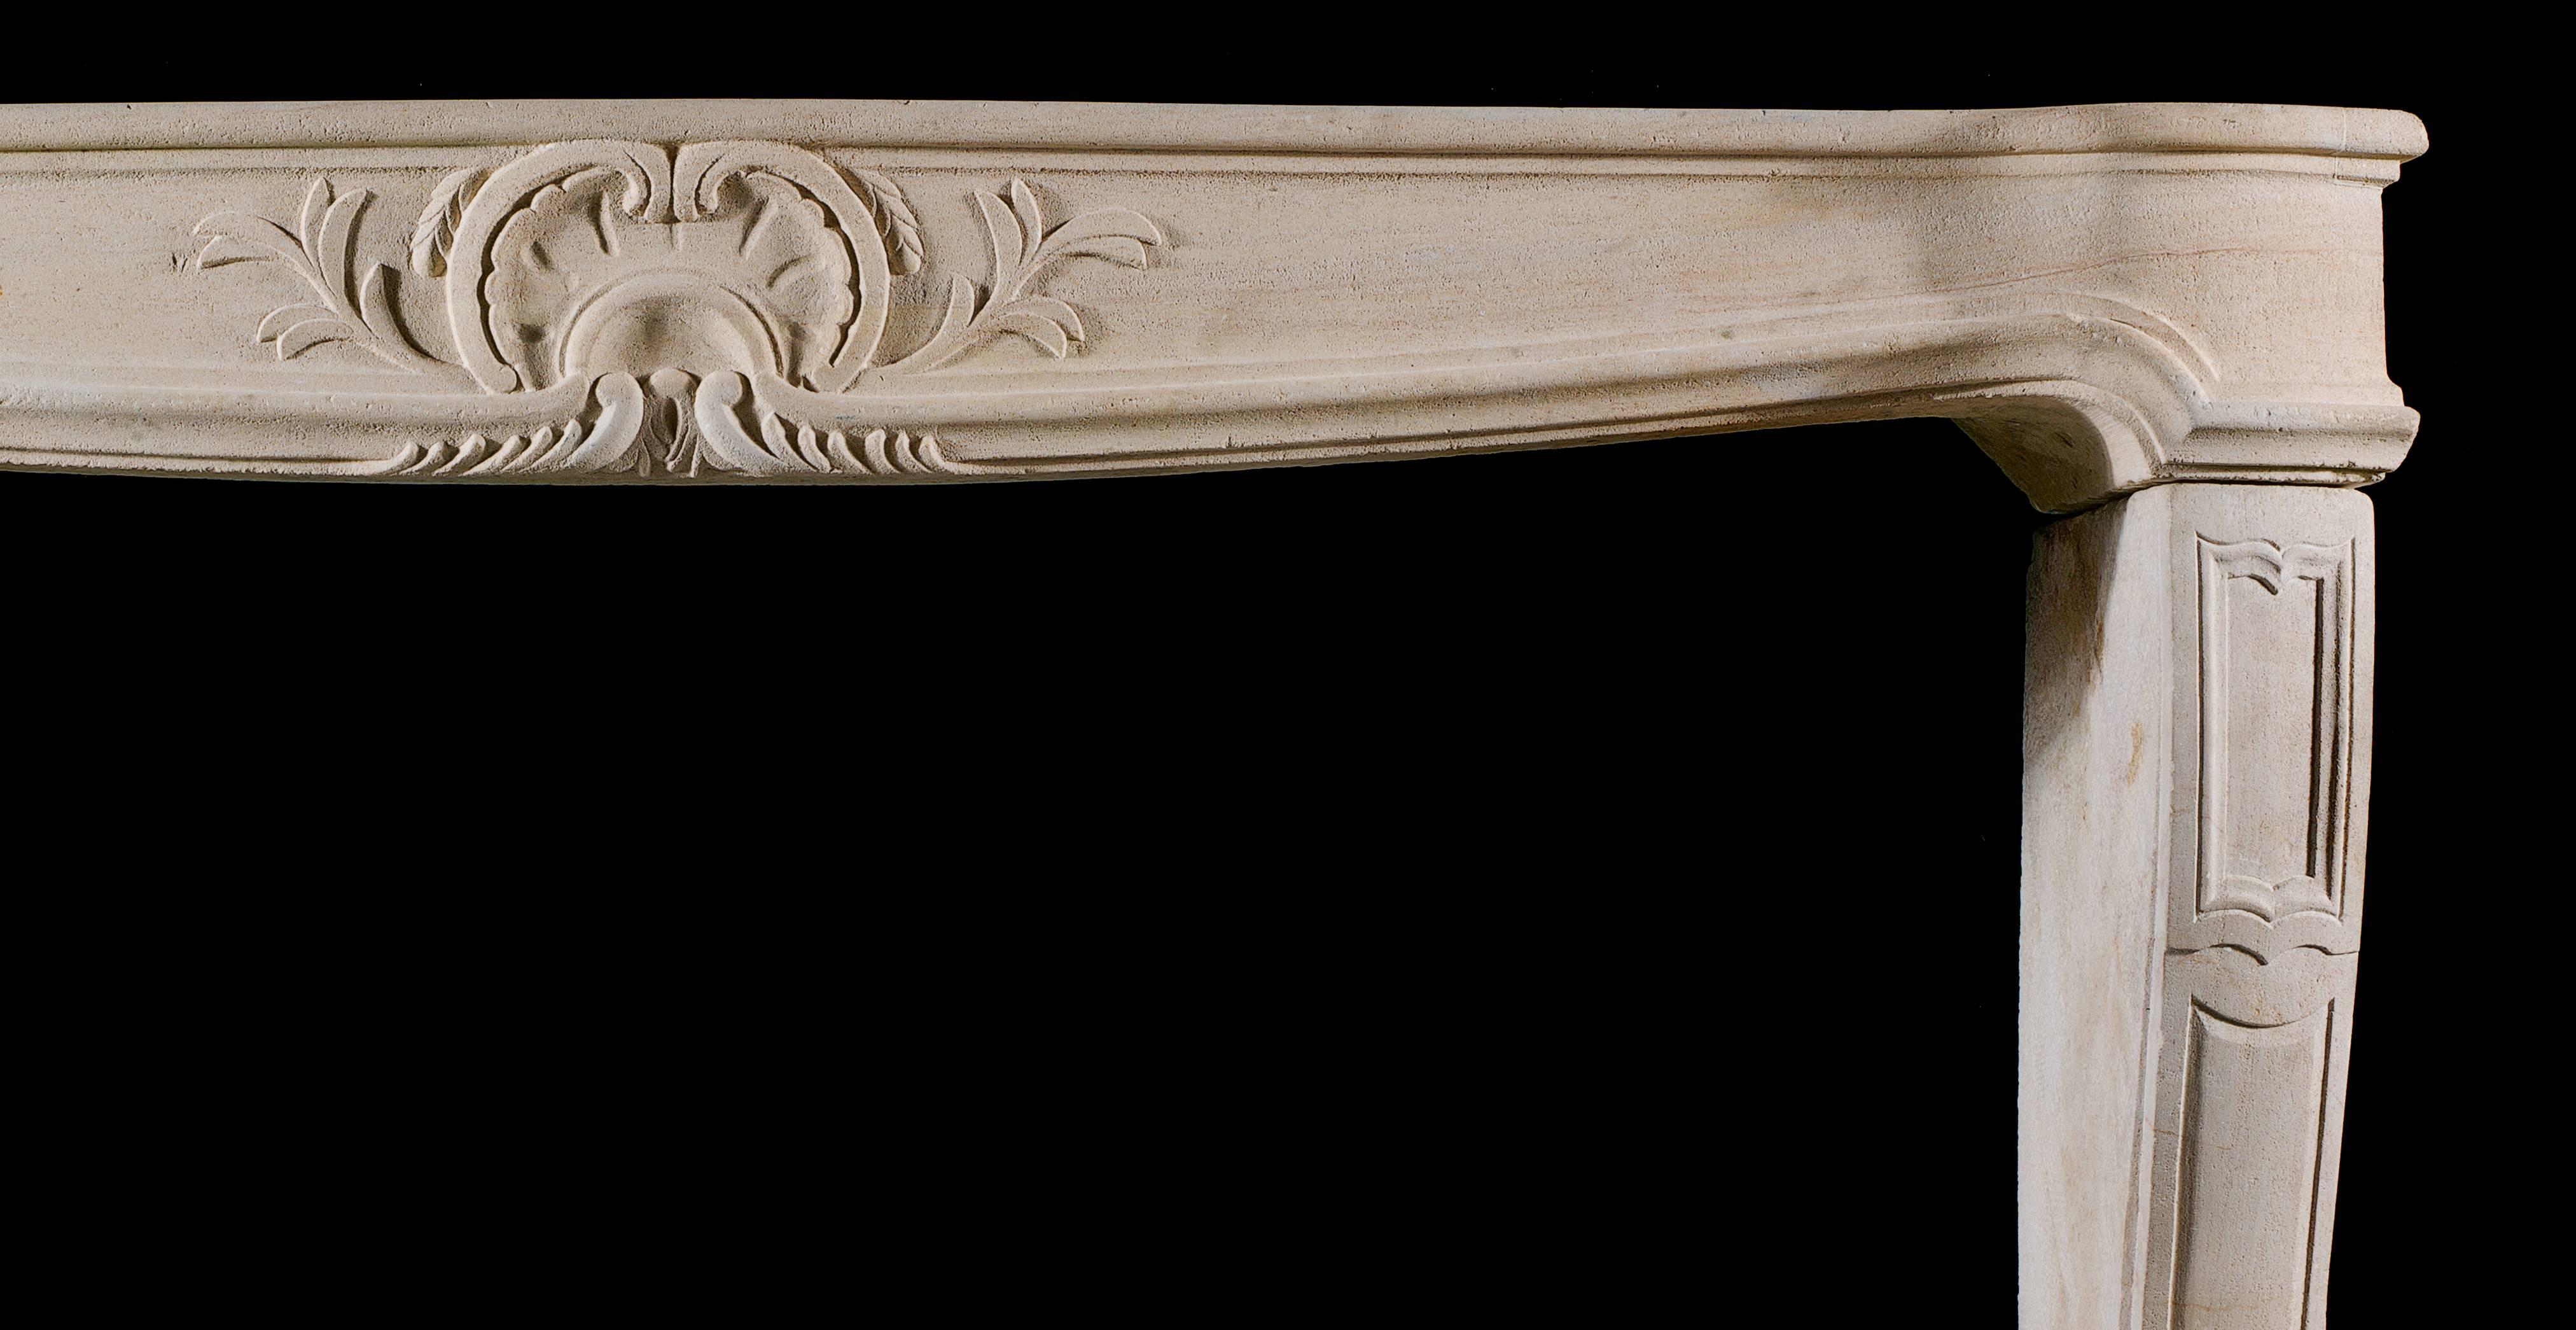 A French Rococo antique fireplace mantel in the Louis XV manner, carved in limestone. The serpentine shelf is integral with the similarly formed frieze, carved from the solid and decorated with a simple floral shell cartouche, supported on panelled